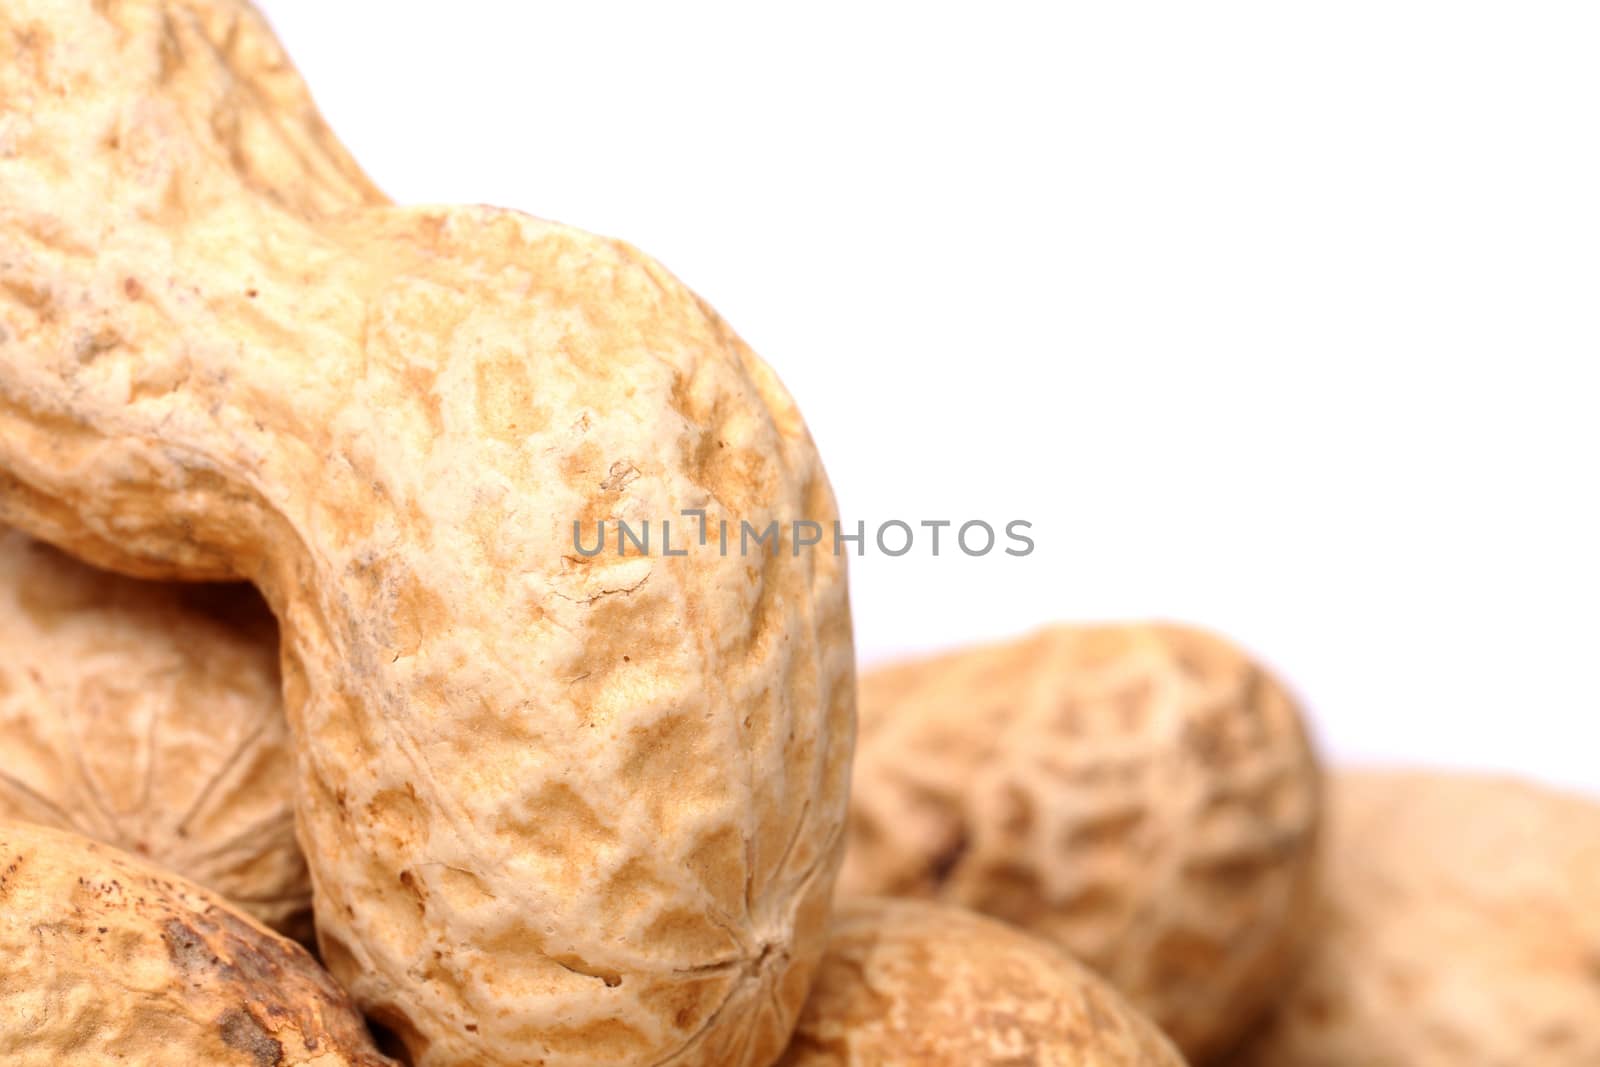 Roasted in-shell peanuts close-up are located left on the white background.